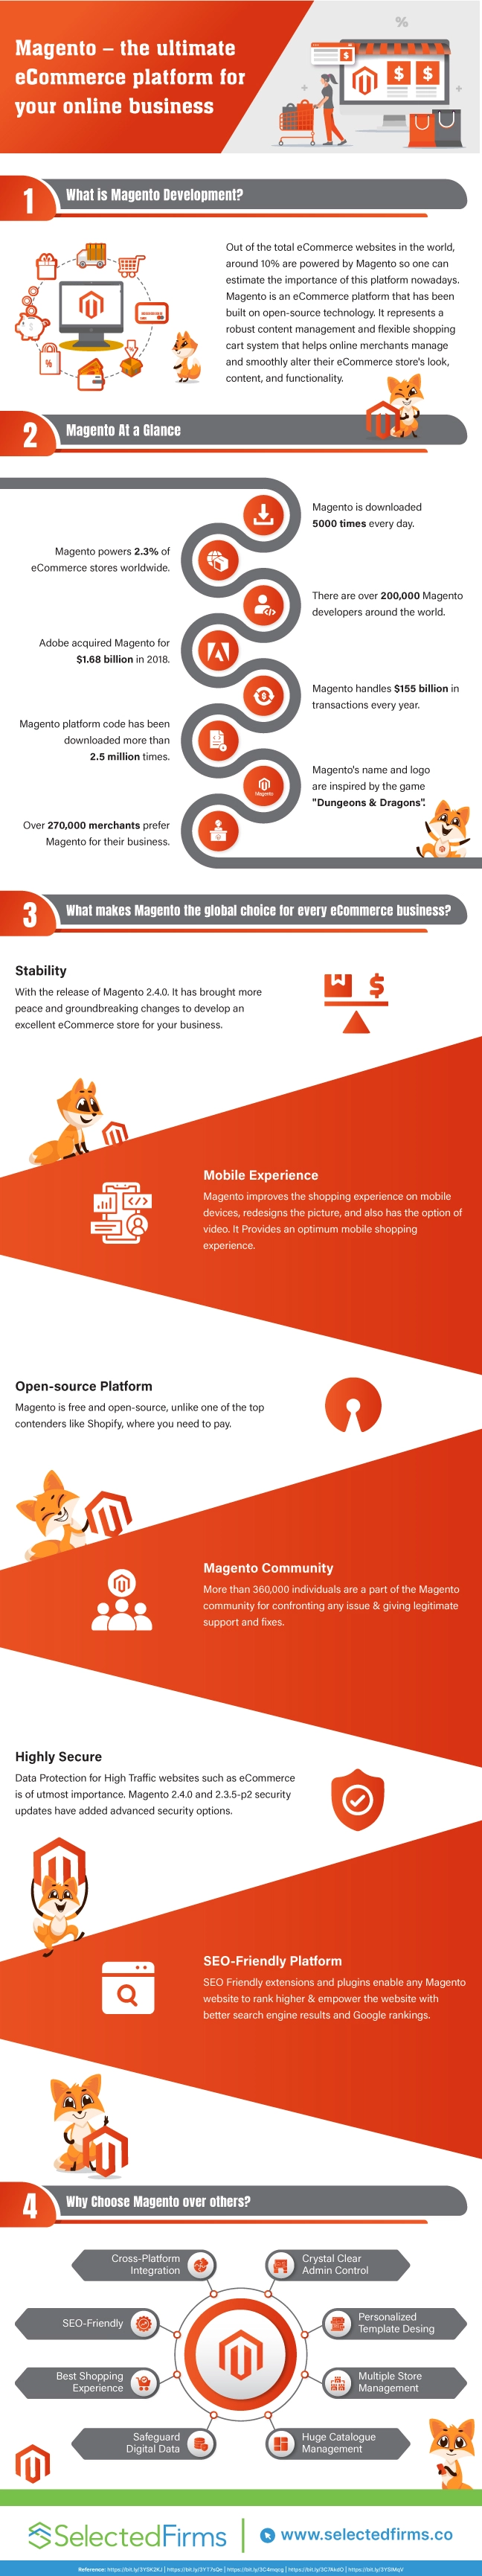 Infographic on Magento – the Ultimate eCommerce platform for your online business 